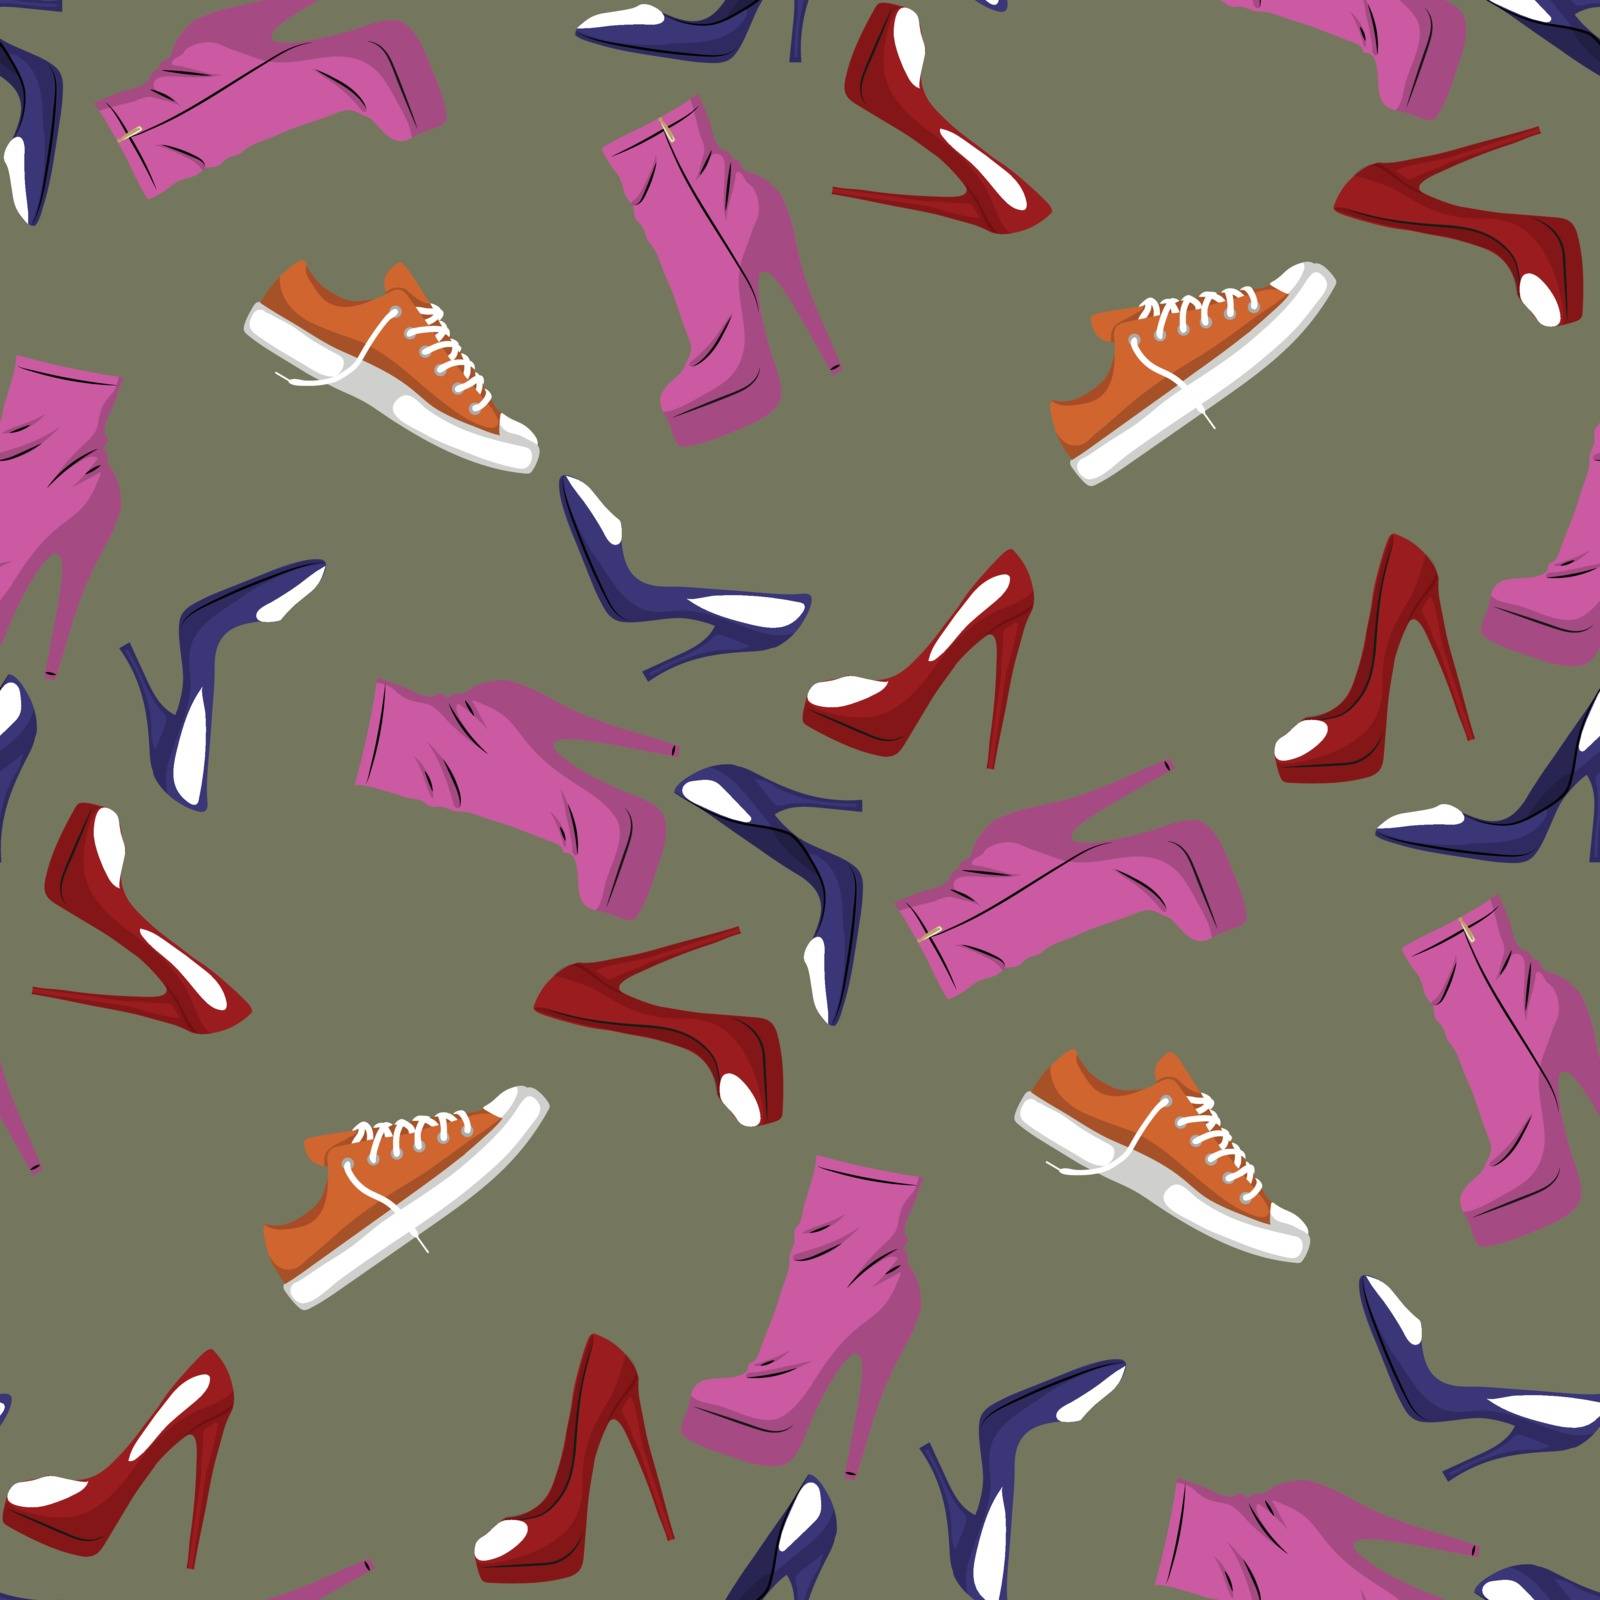 Seamless pattern of Shoes - running shoes sneakers, boots, high-heeled shoe. Design element. Fashion Vector Illustration